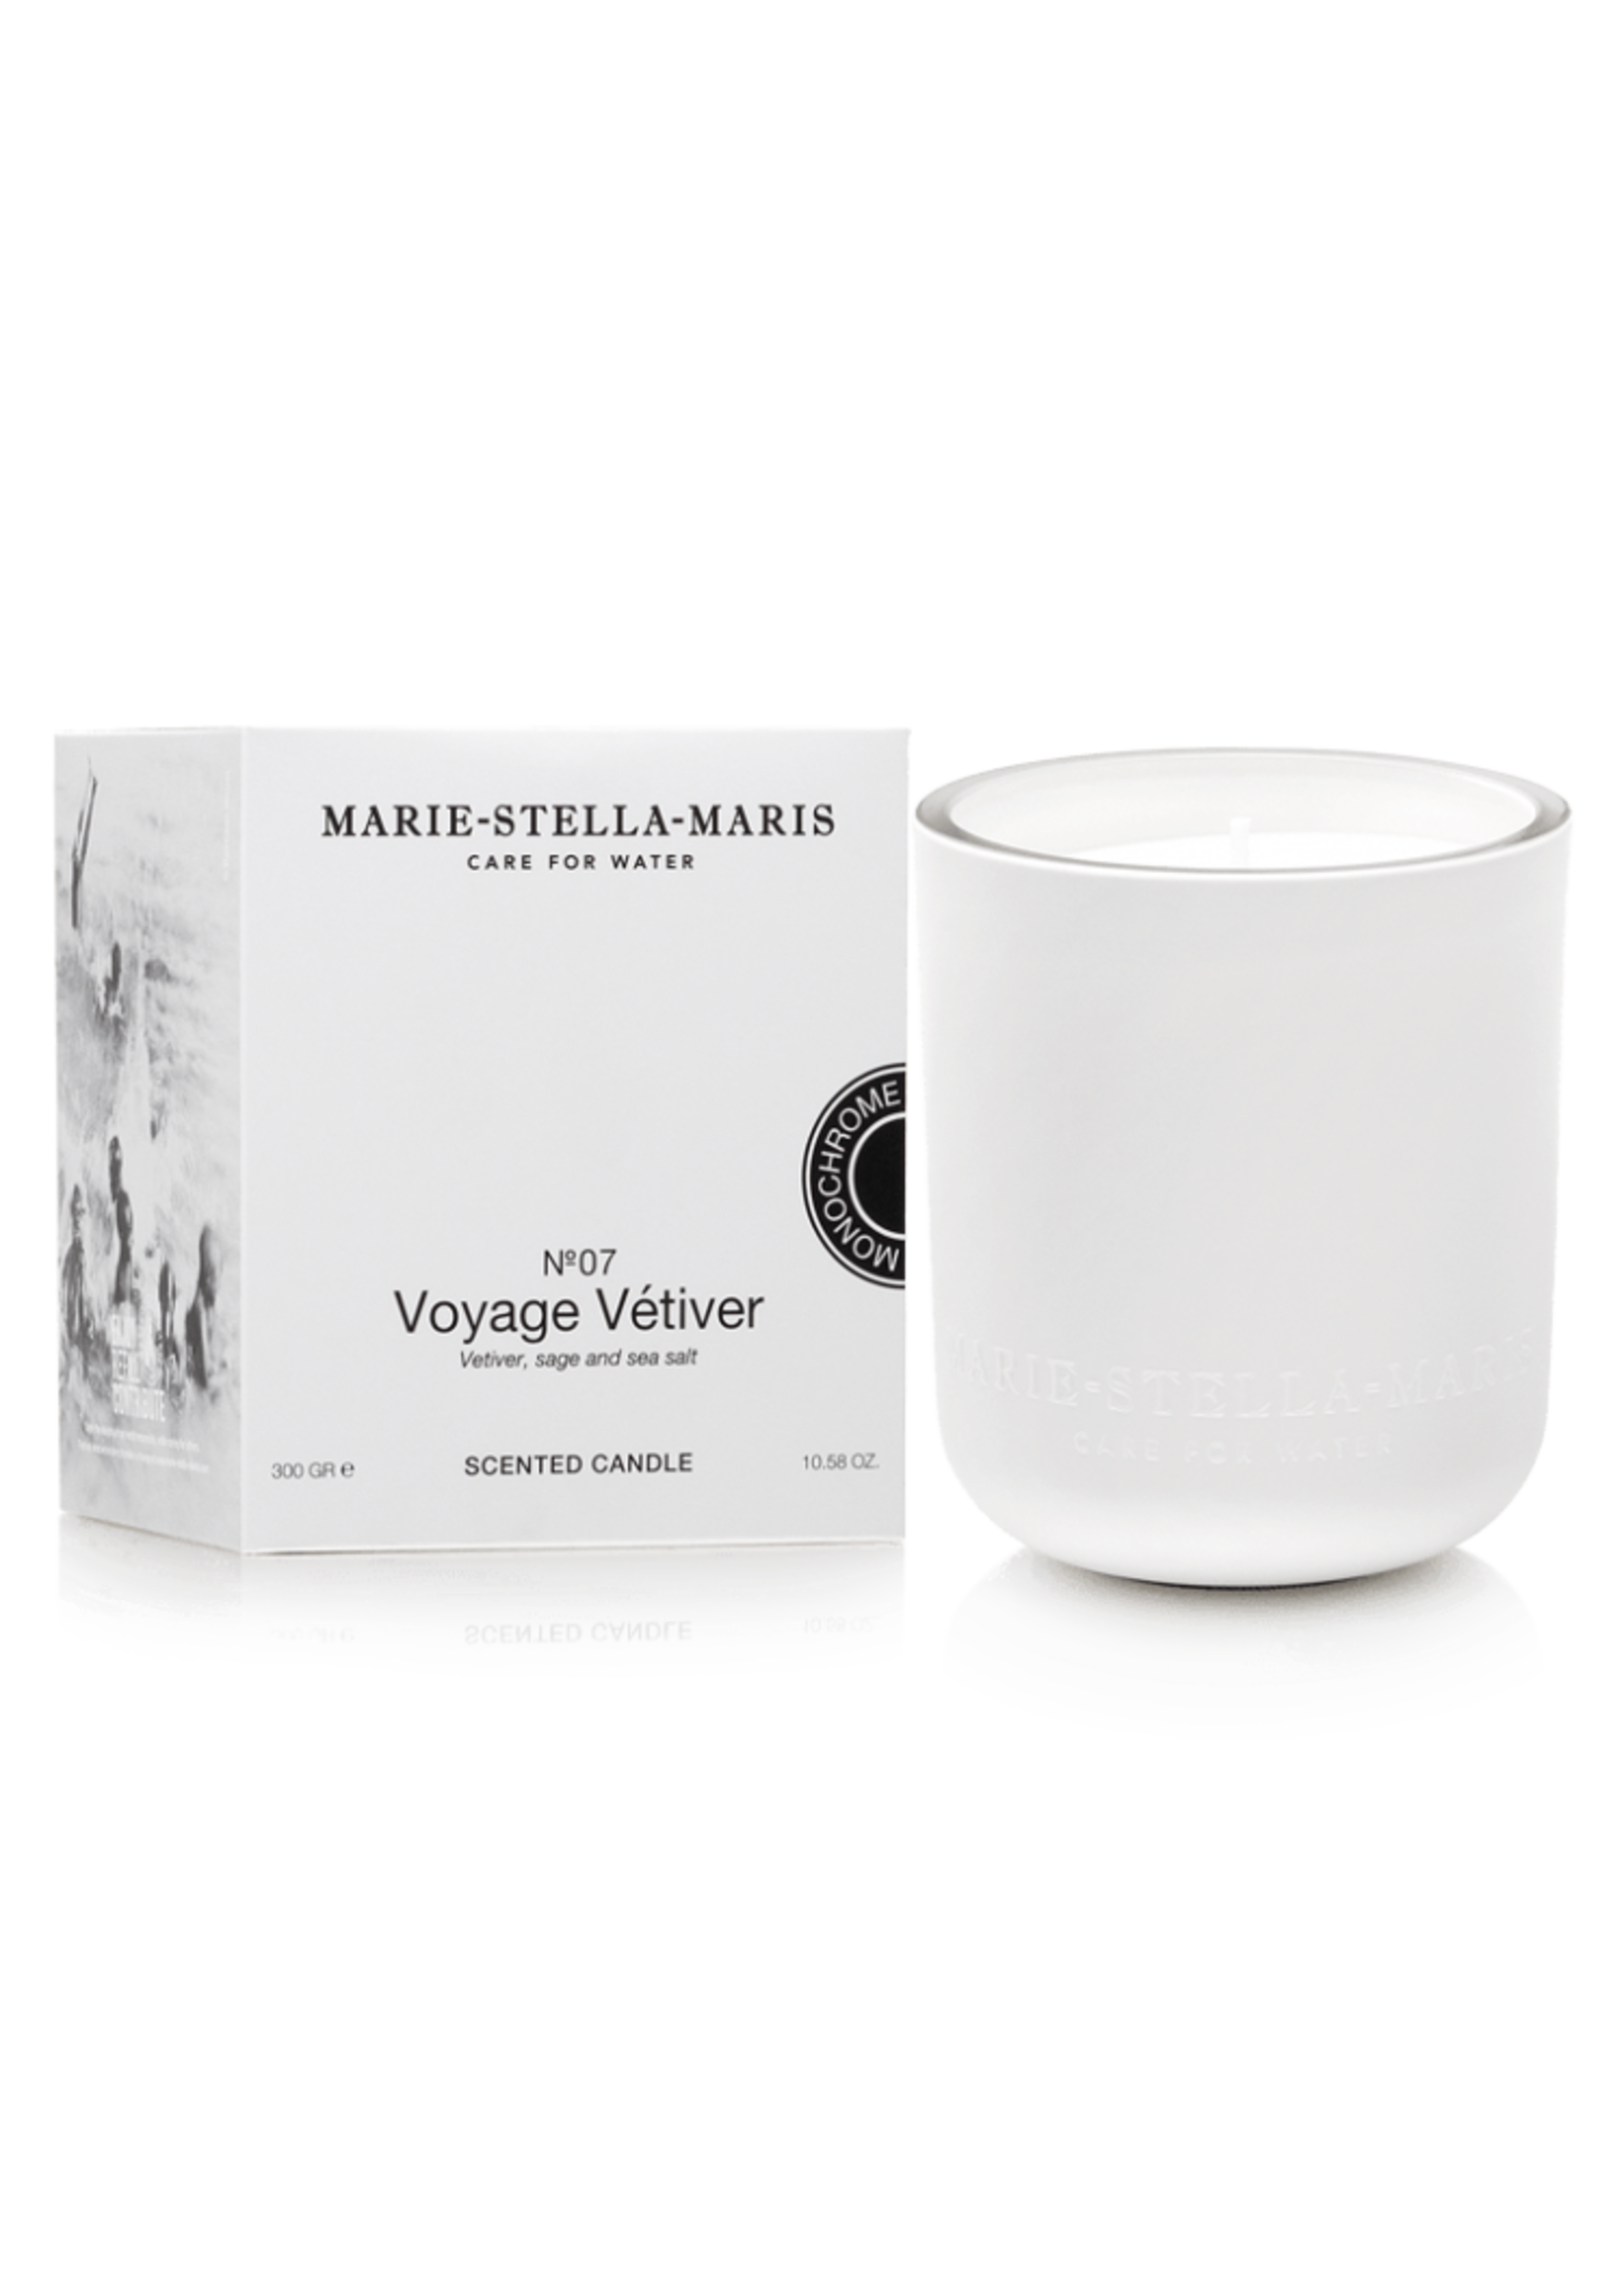 Marie-Stella-Maris Scented Candle Voyage Vetiver 300 gr Monochrome Edition